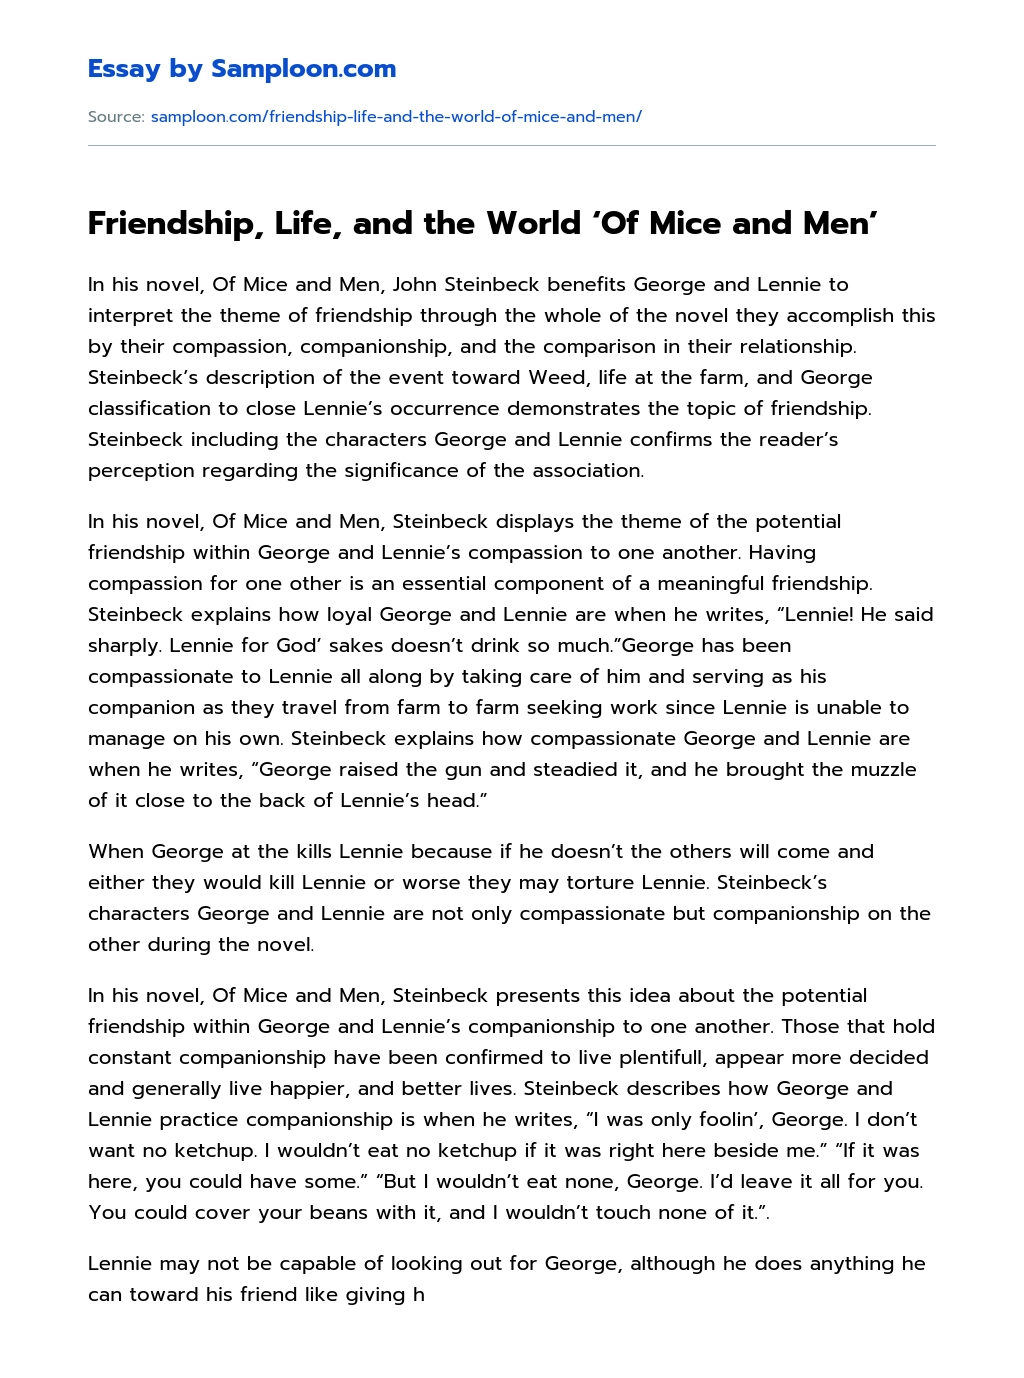 Friendship, Life, and the World ‘Of Mice and Men’ essay